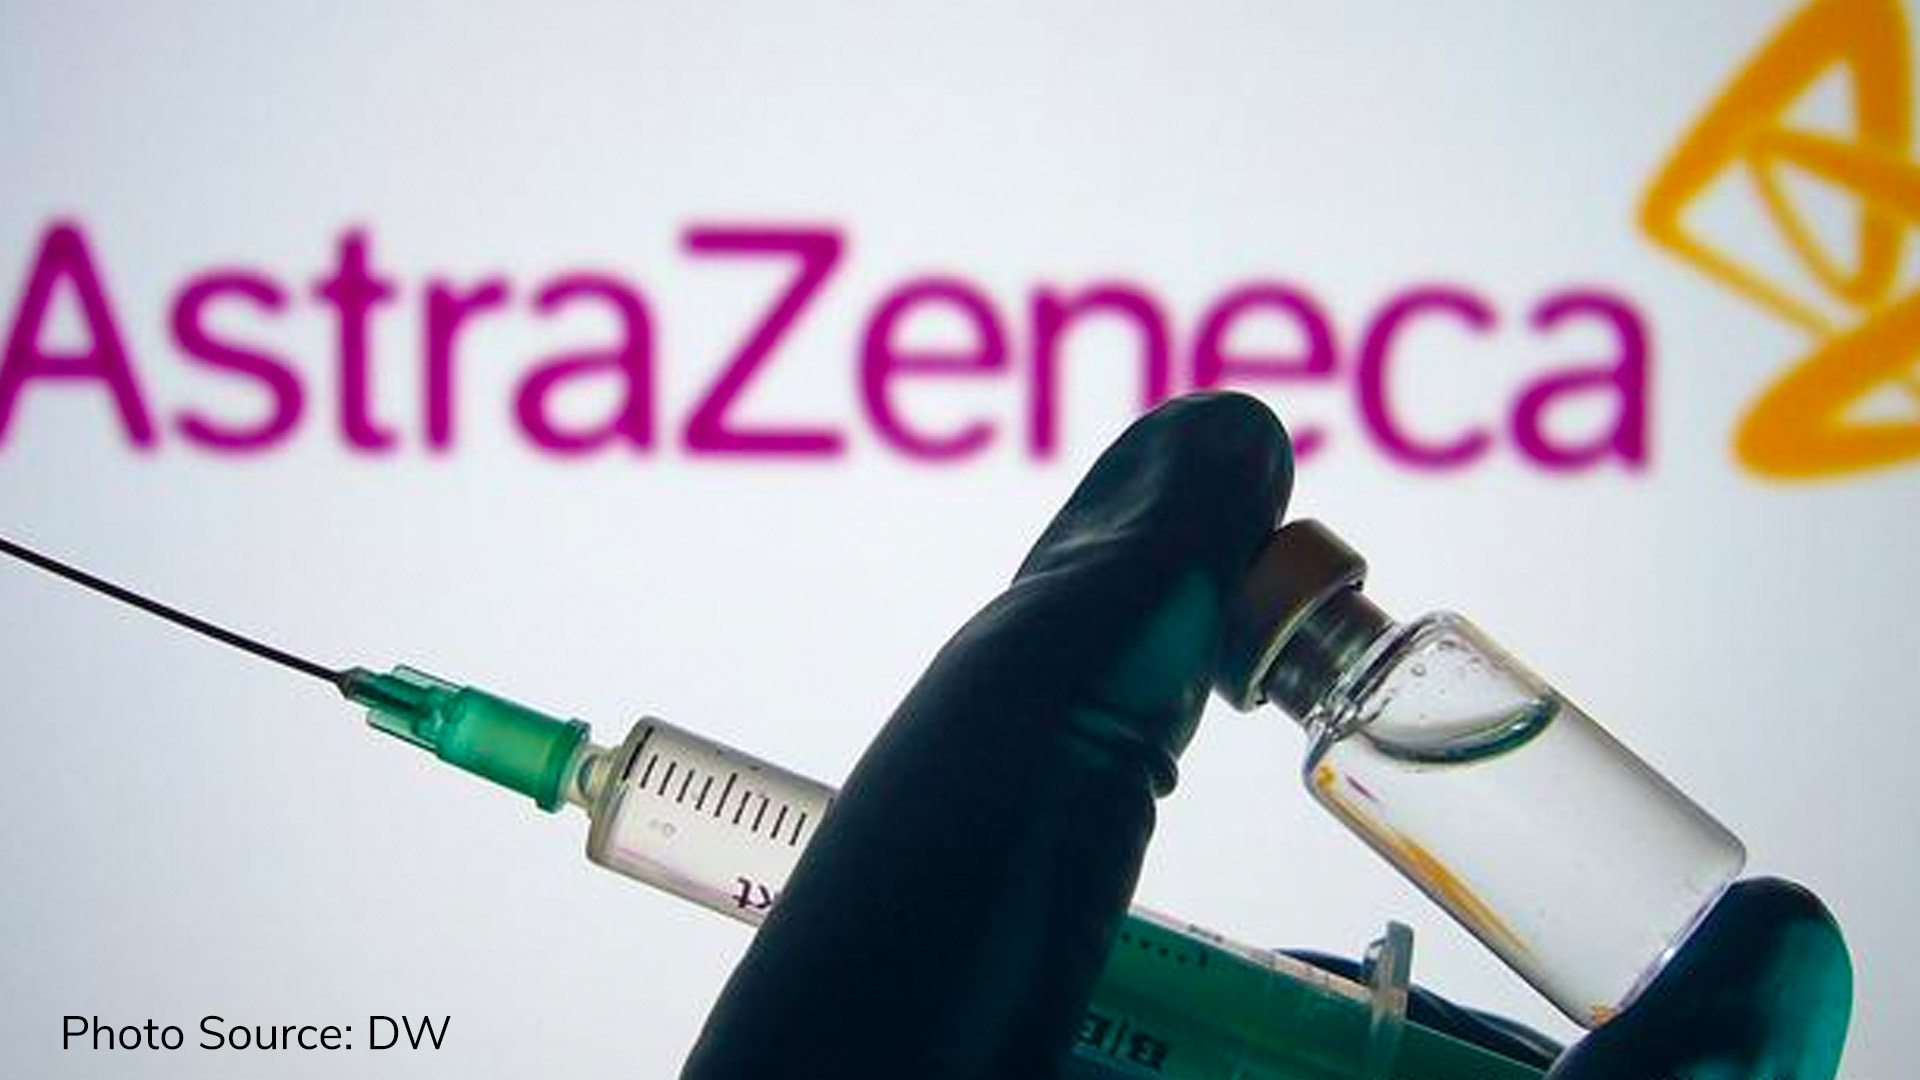 7 deaths in UK from AstraZeneca vaccine recipients with blood clot connections